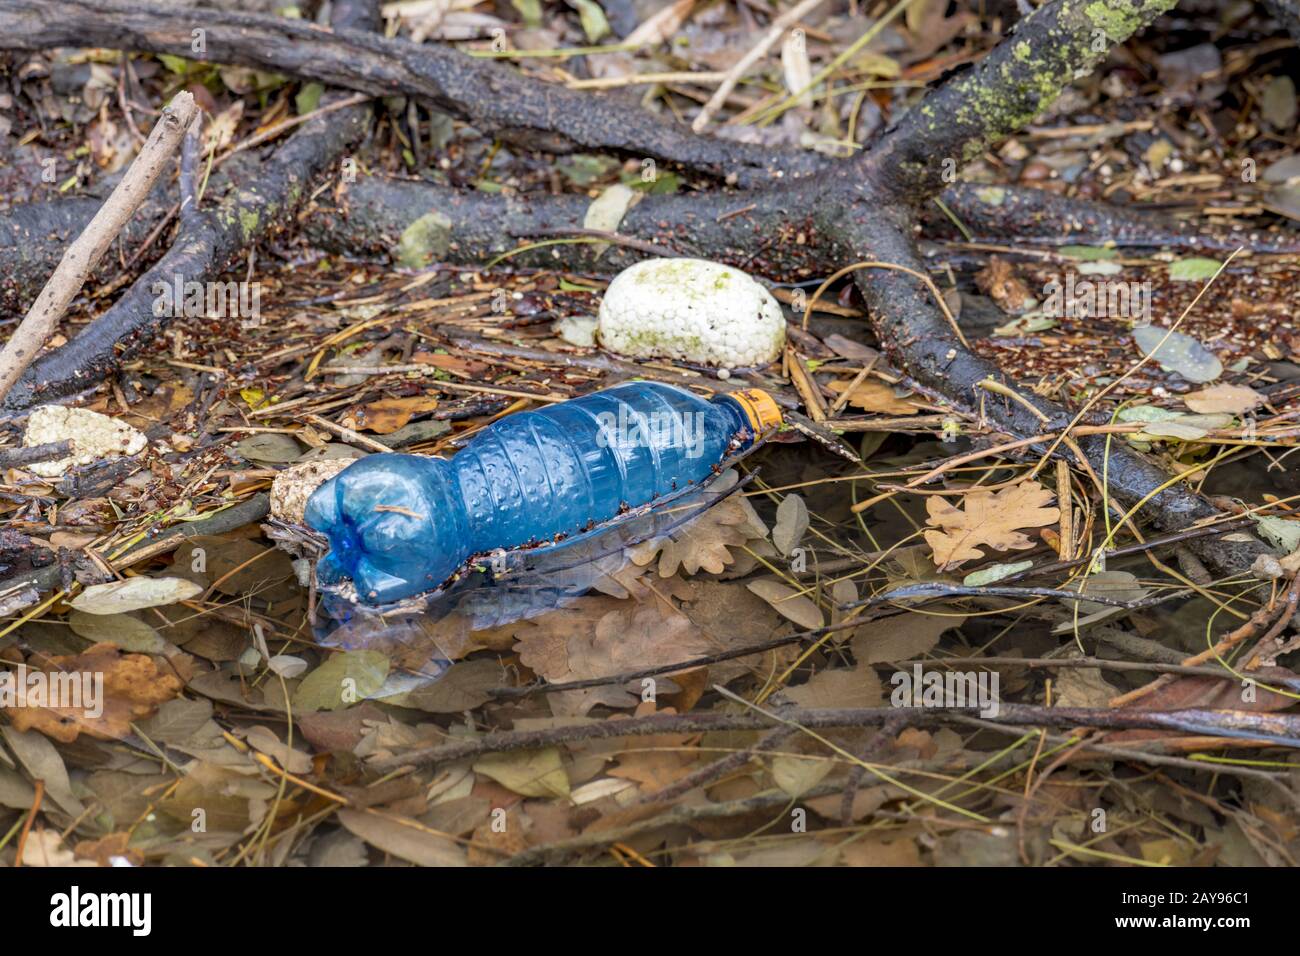 Discarded plastic beverage bottle floats on a watercourse with other garbage Stock Photo